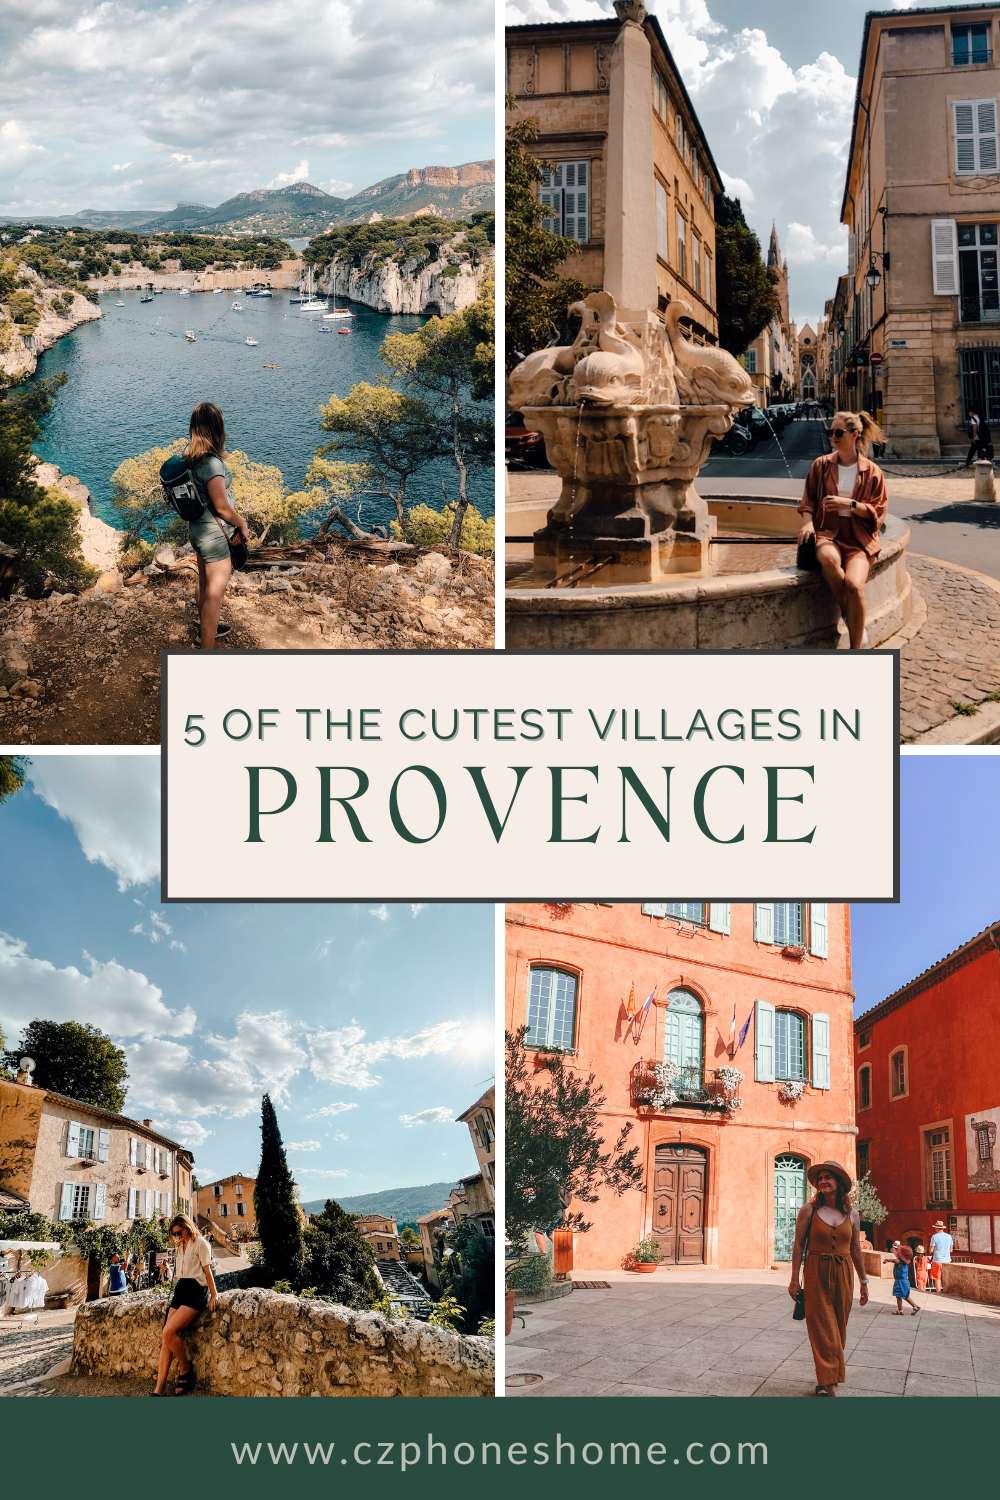 Cutest villages in Provence 